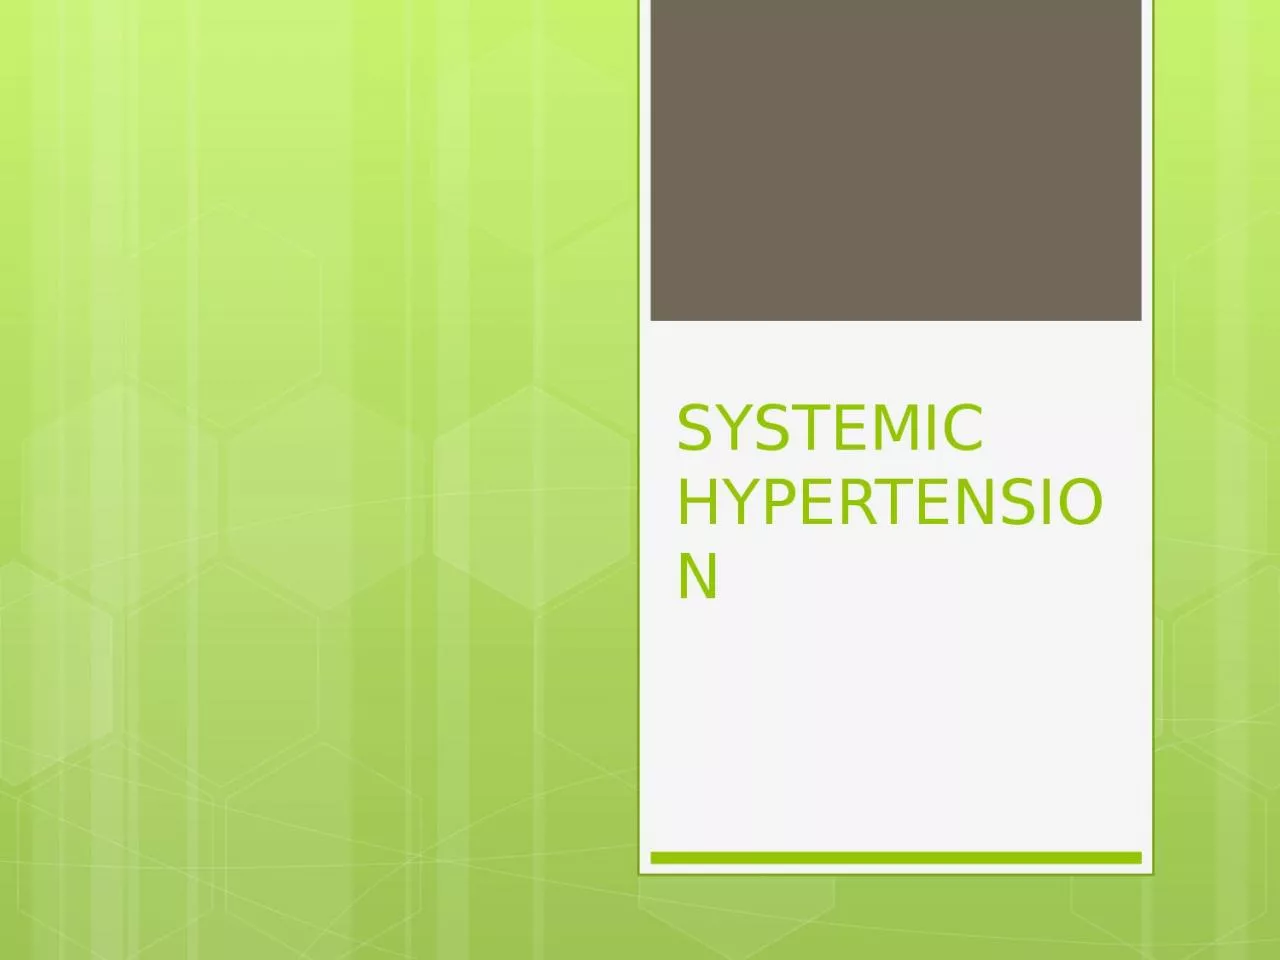 SYSTEMIC HYPERTENSION Hypertension is one of the leading causes of the global burden of